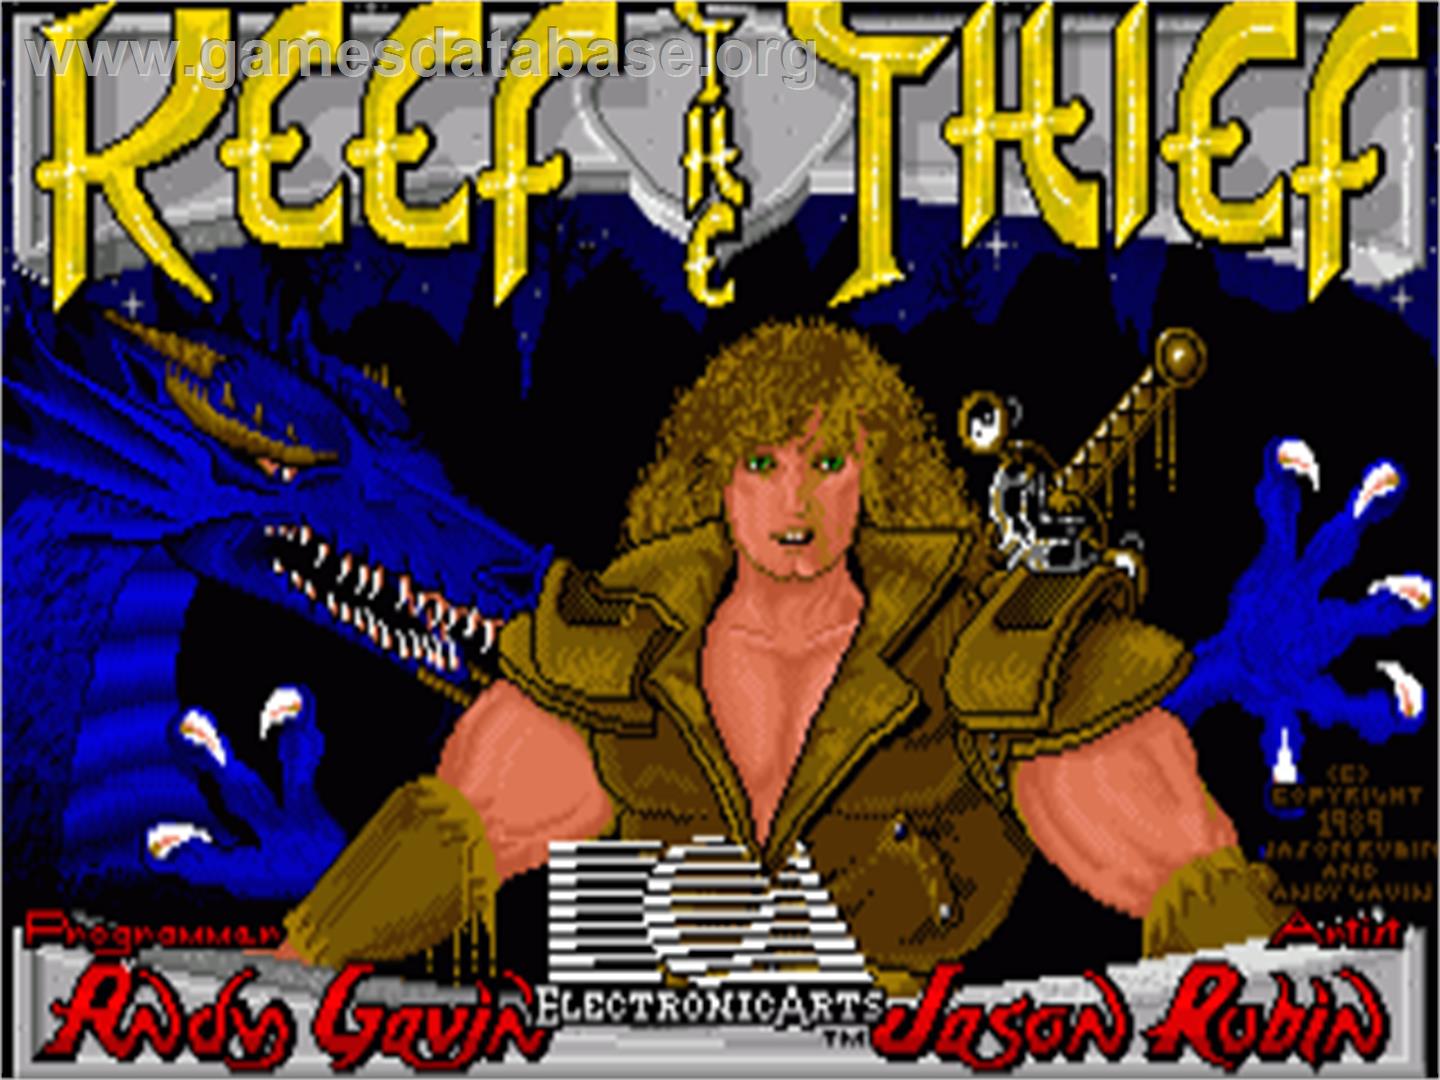 Keef the Thief: A Boy and His Lockpick - Commodore Amiga - Artwork - Title Screen